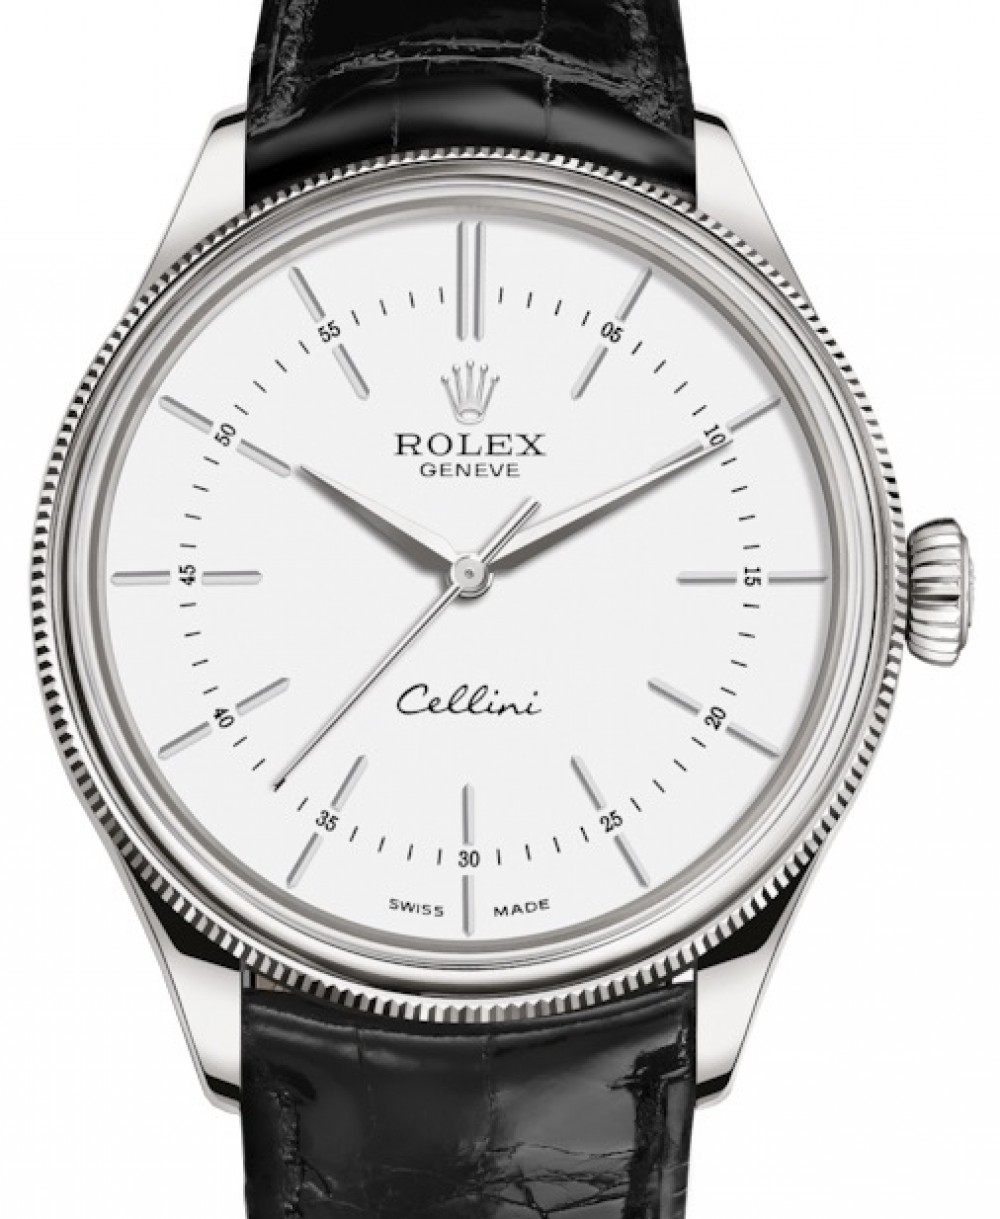 Rolex Cellini Time White Gold Index Dial Domed & Fluted Double Bezel Black Leather Bracelet 50509 - BRAND NEW